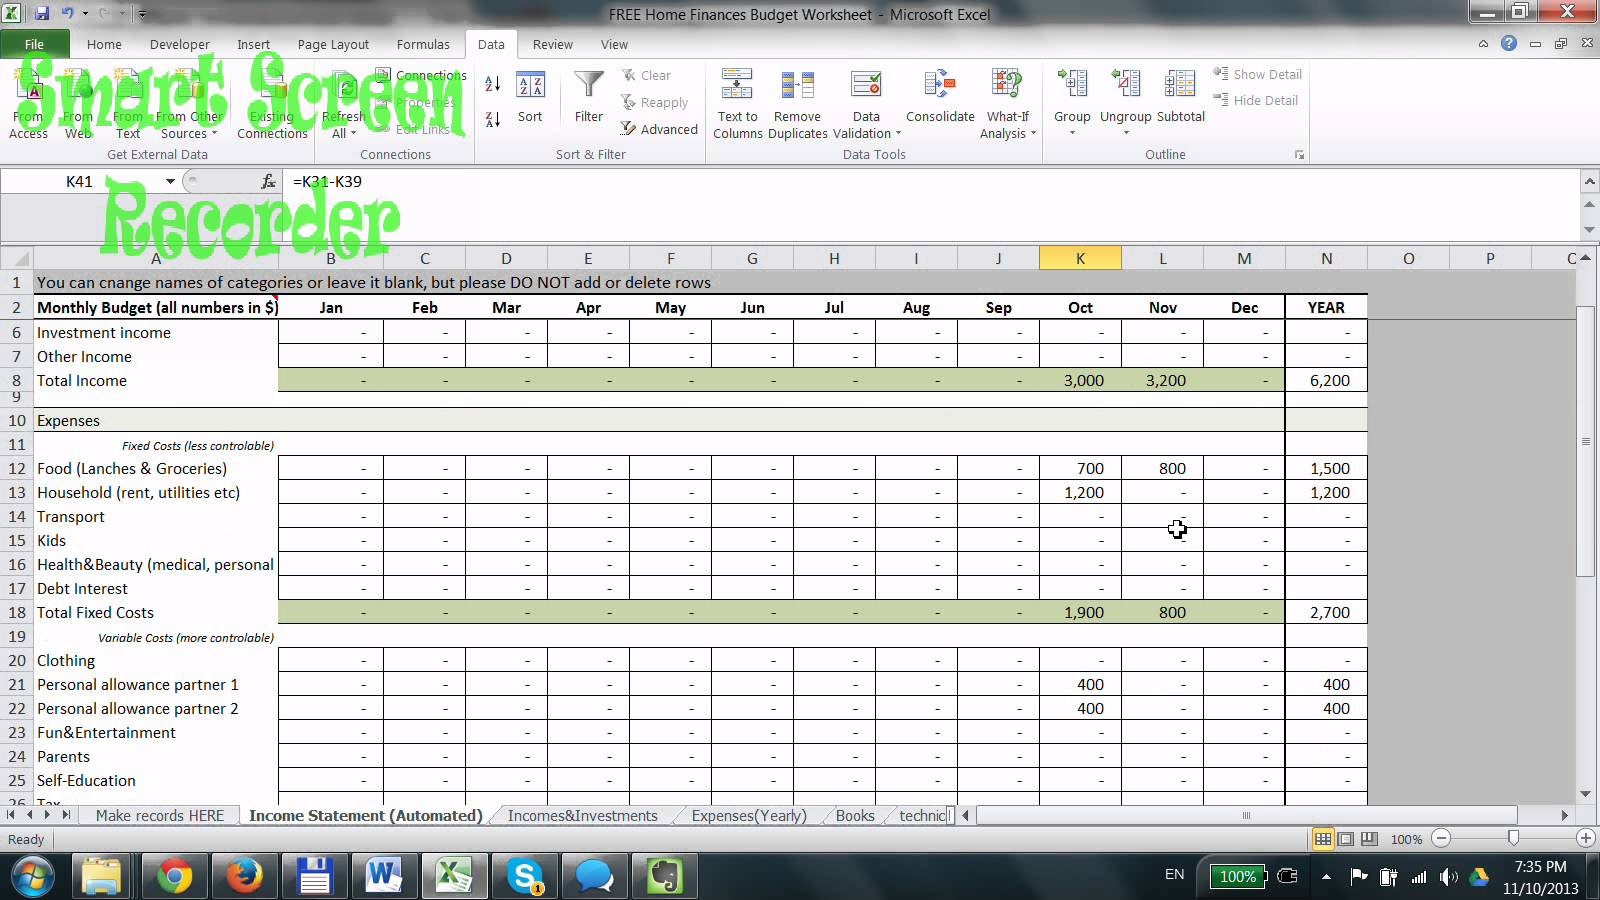 How To Make A Home Budget Spreadsheet Excel Inside How To Make Home Budget Spreadsheet Do Household Worksheet Excel Use